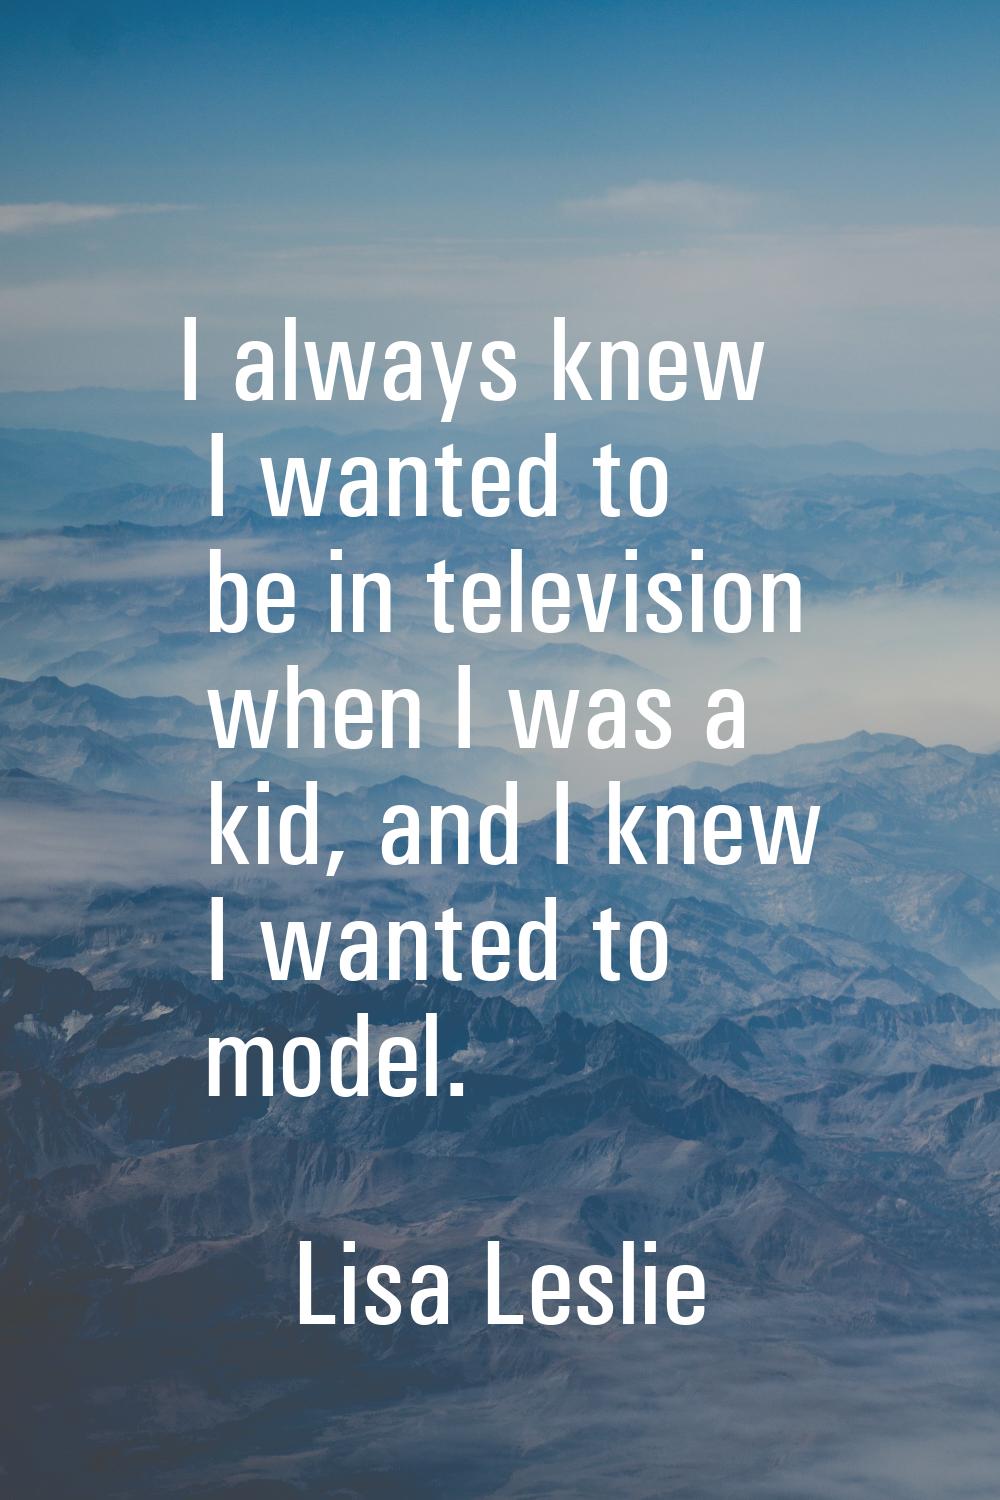 I always knew I wanted to be in television when I was a kid, and I knew I wanted to model.